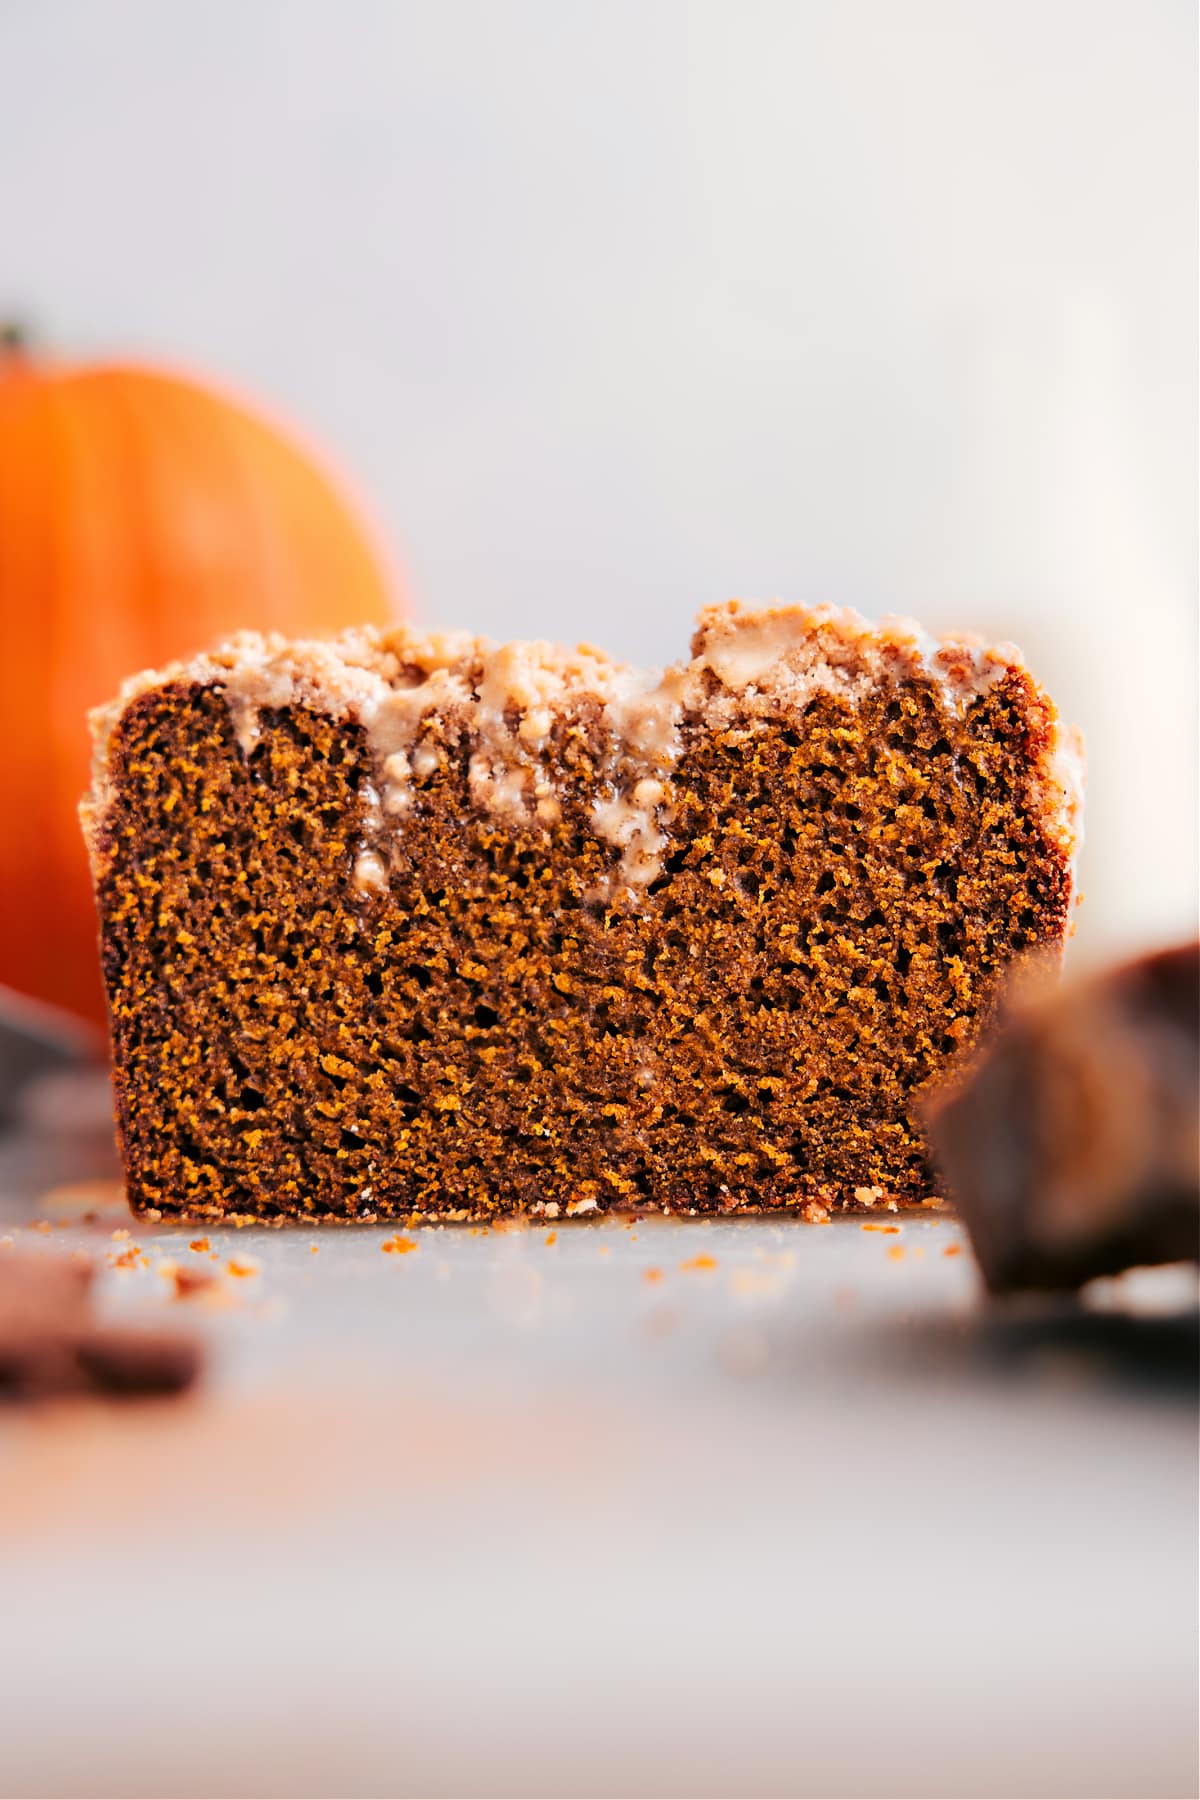 Pumpkin bread with streusel topping, slice removed, showcasing its deliciousness.